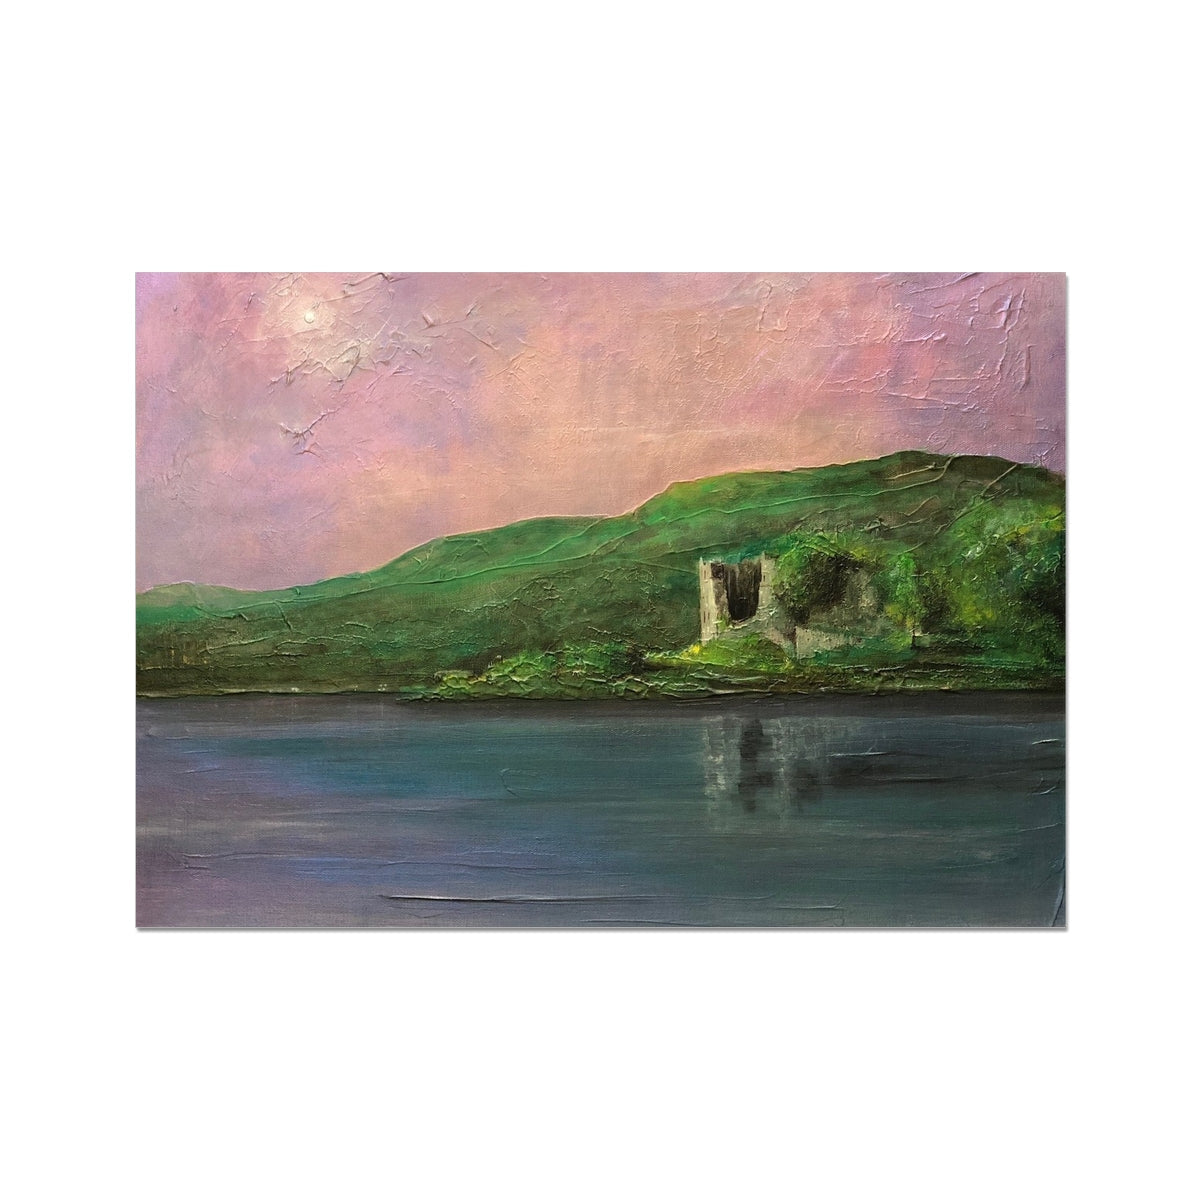 Old Castle Lachlan Painting | Fine Art Prints From Scotland-Unframed Prints-Historic & Iconic Scotland Art Gallery-A2 Landscape-Paintings, Prints, Homeware, Art Gifts From Scotland By Scottish Artist Kevin Hunter